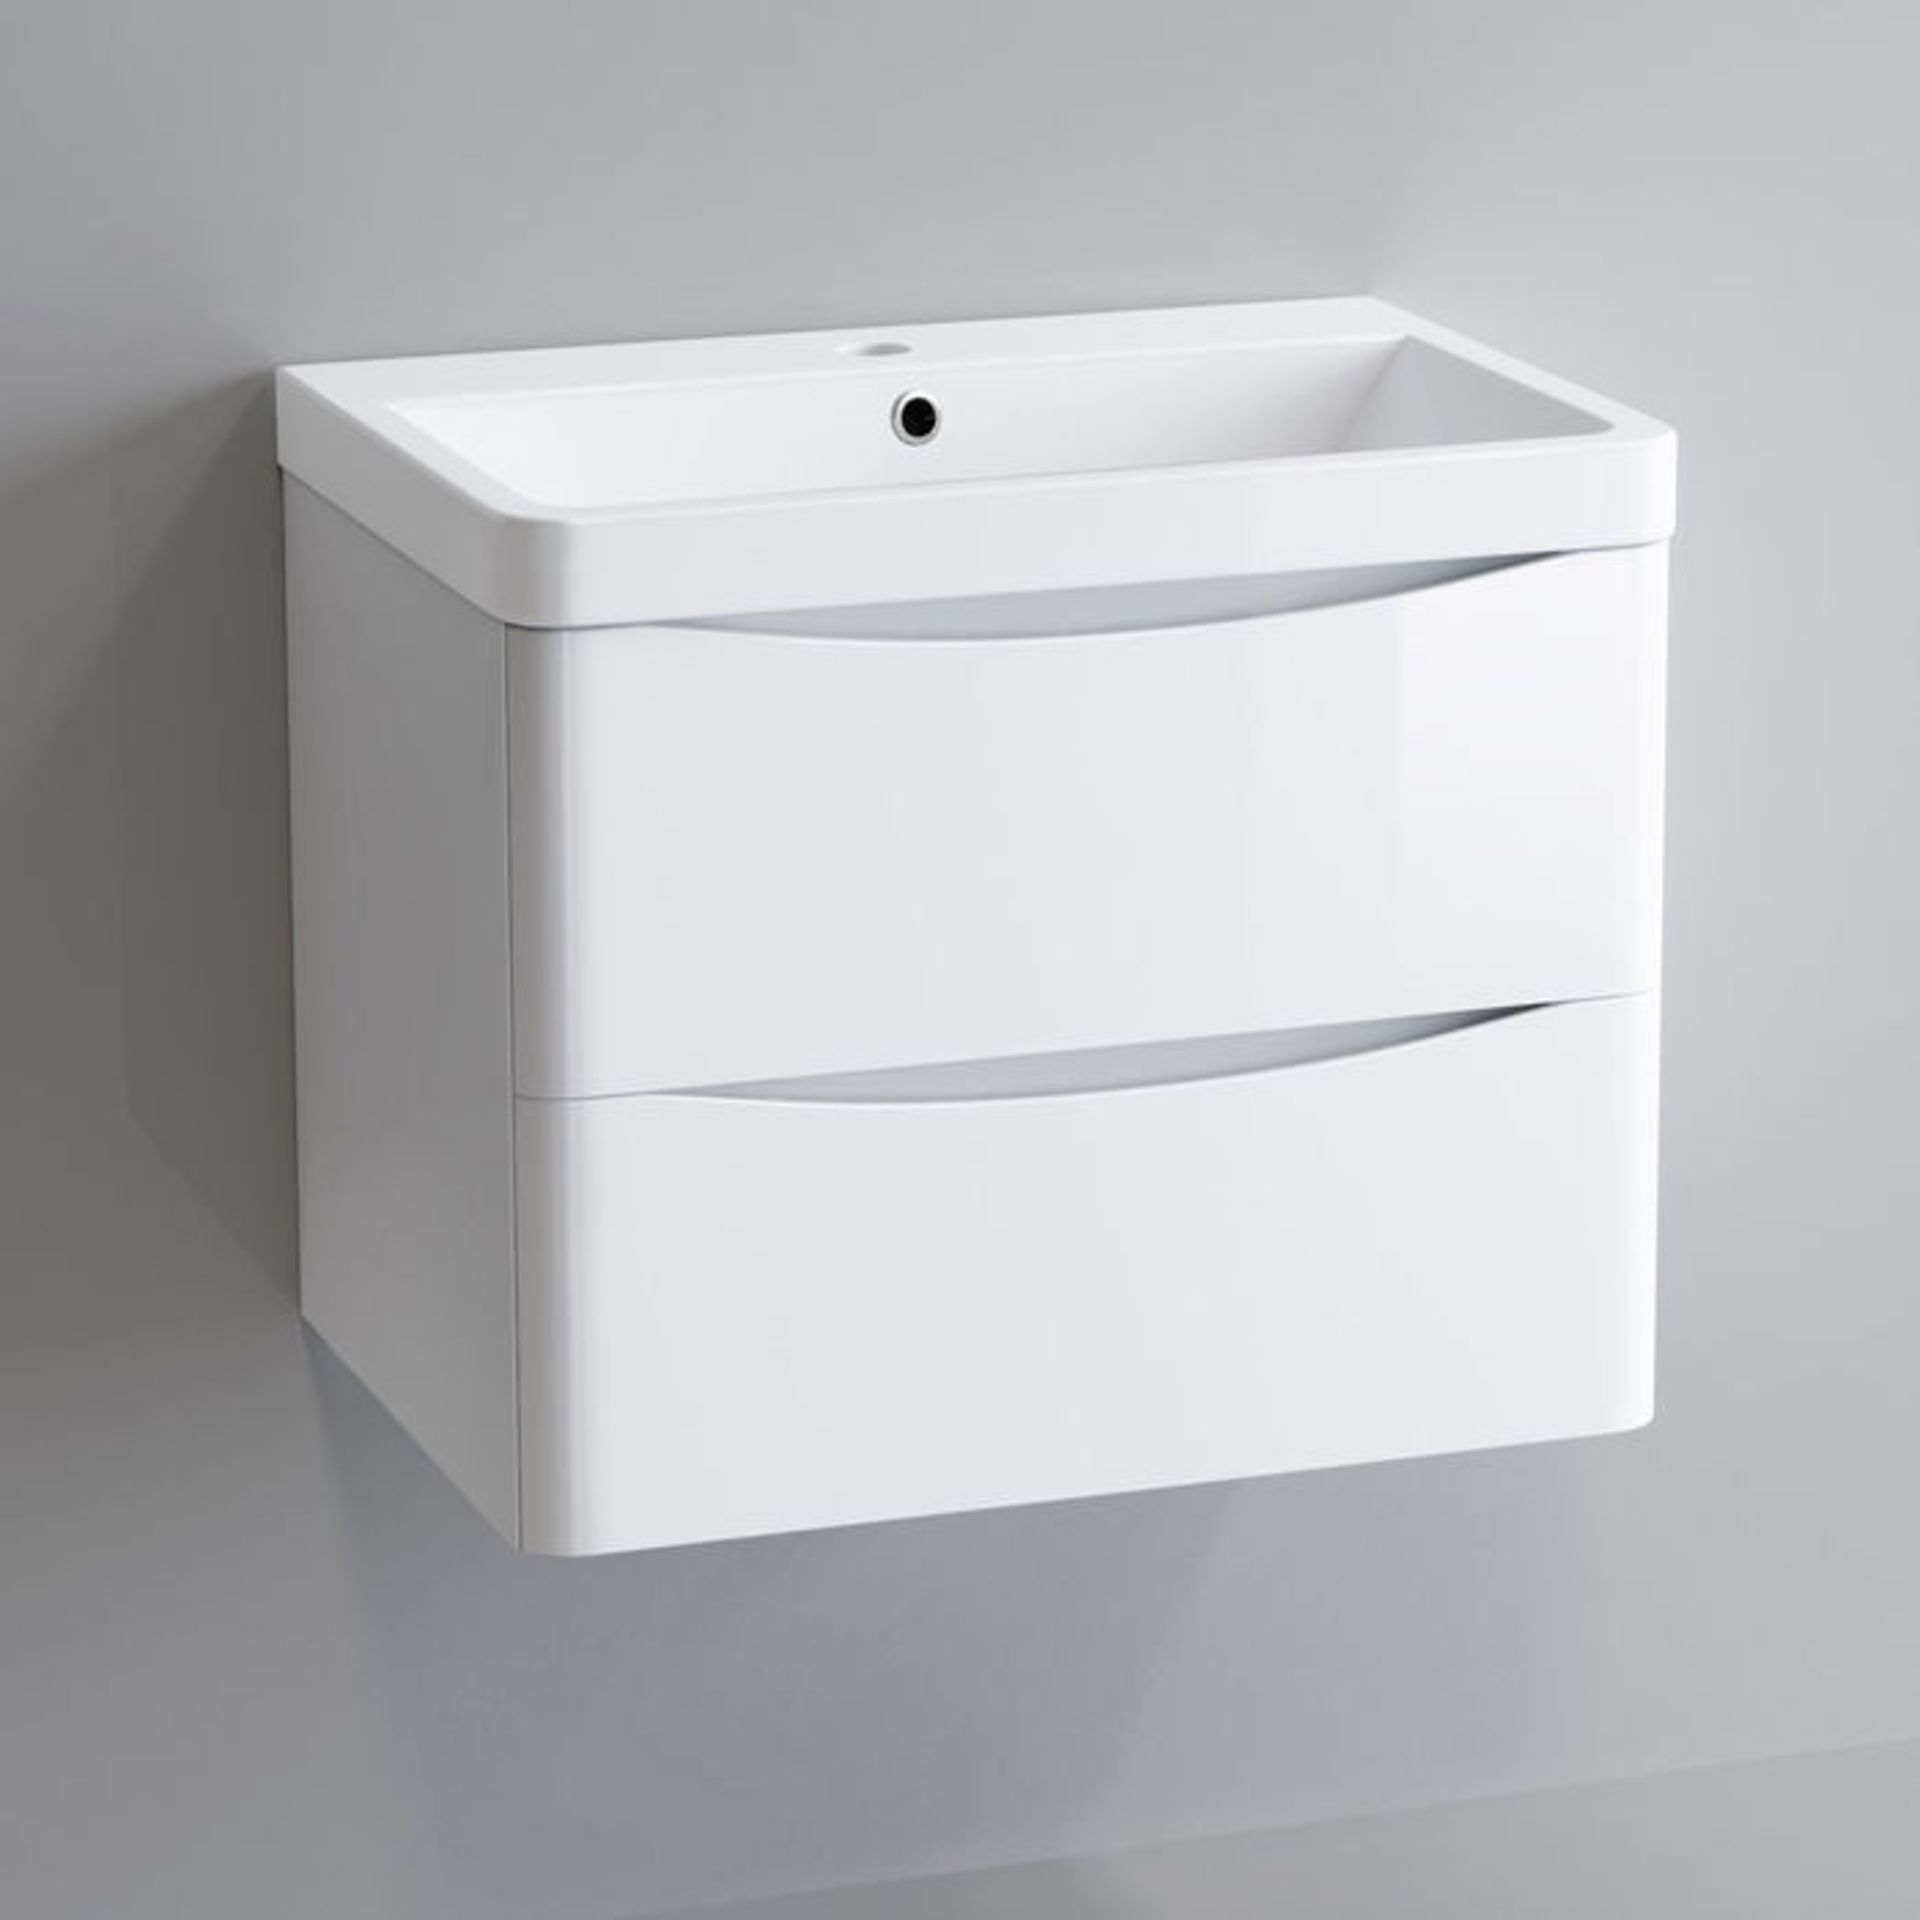 (PT14) 600mm Austin II Gloss White Built In Basin Drawer Unit - Wall Hung. RRP £499.99. Comes - Image 5 of 5